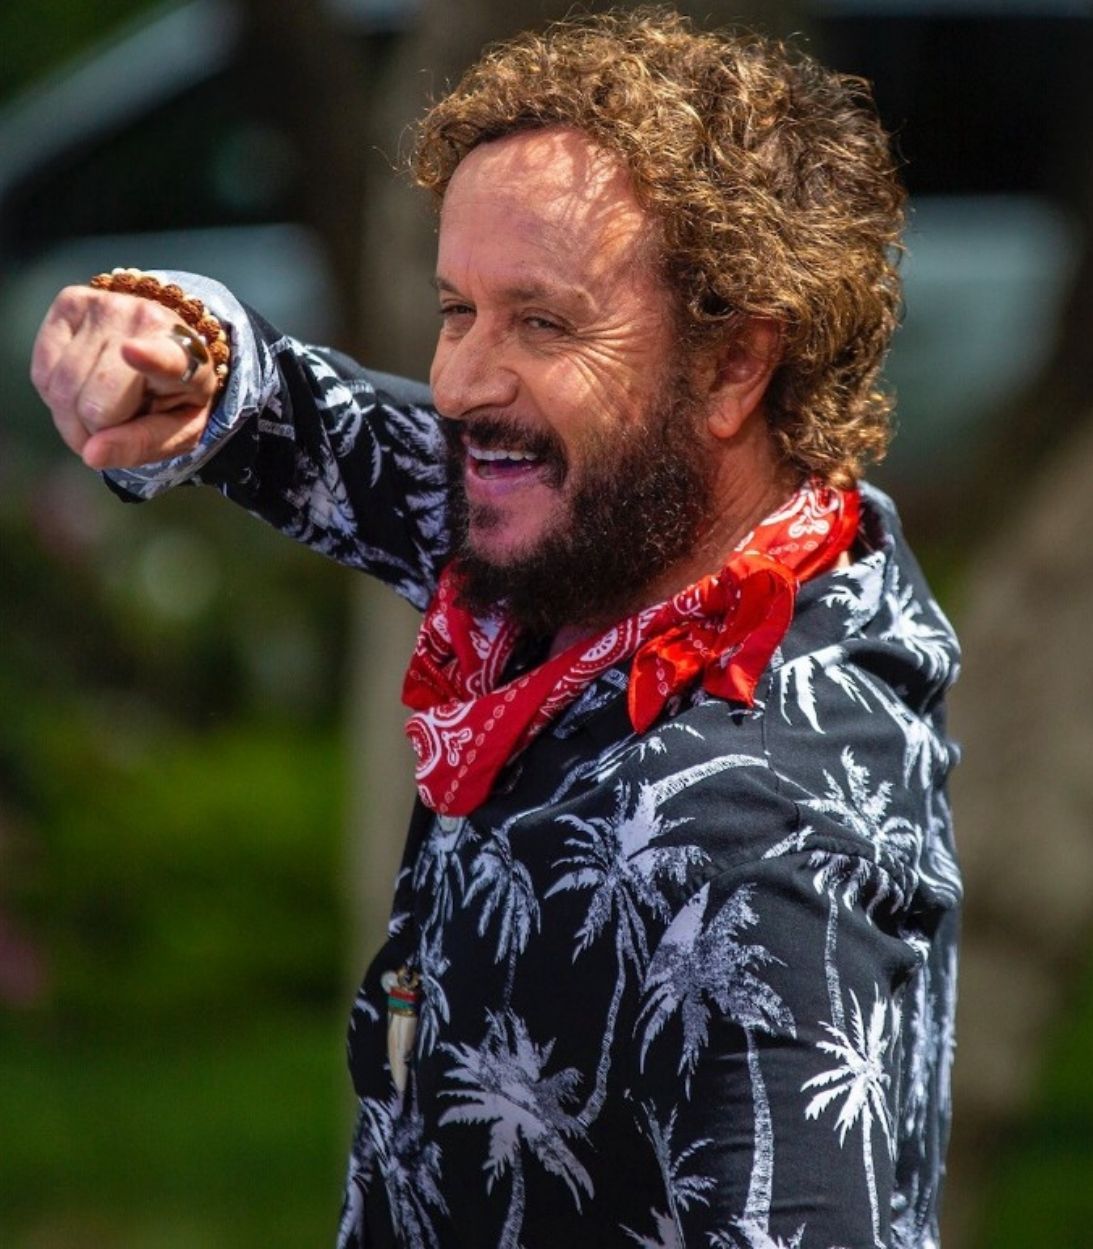 Pauly Shore Was 'Up All Night Crying' Over Richard Simmons' Disapproval of Biopic